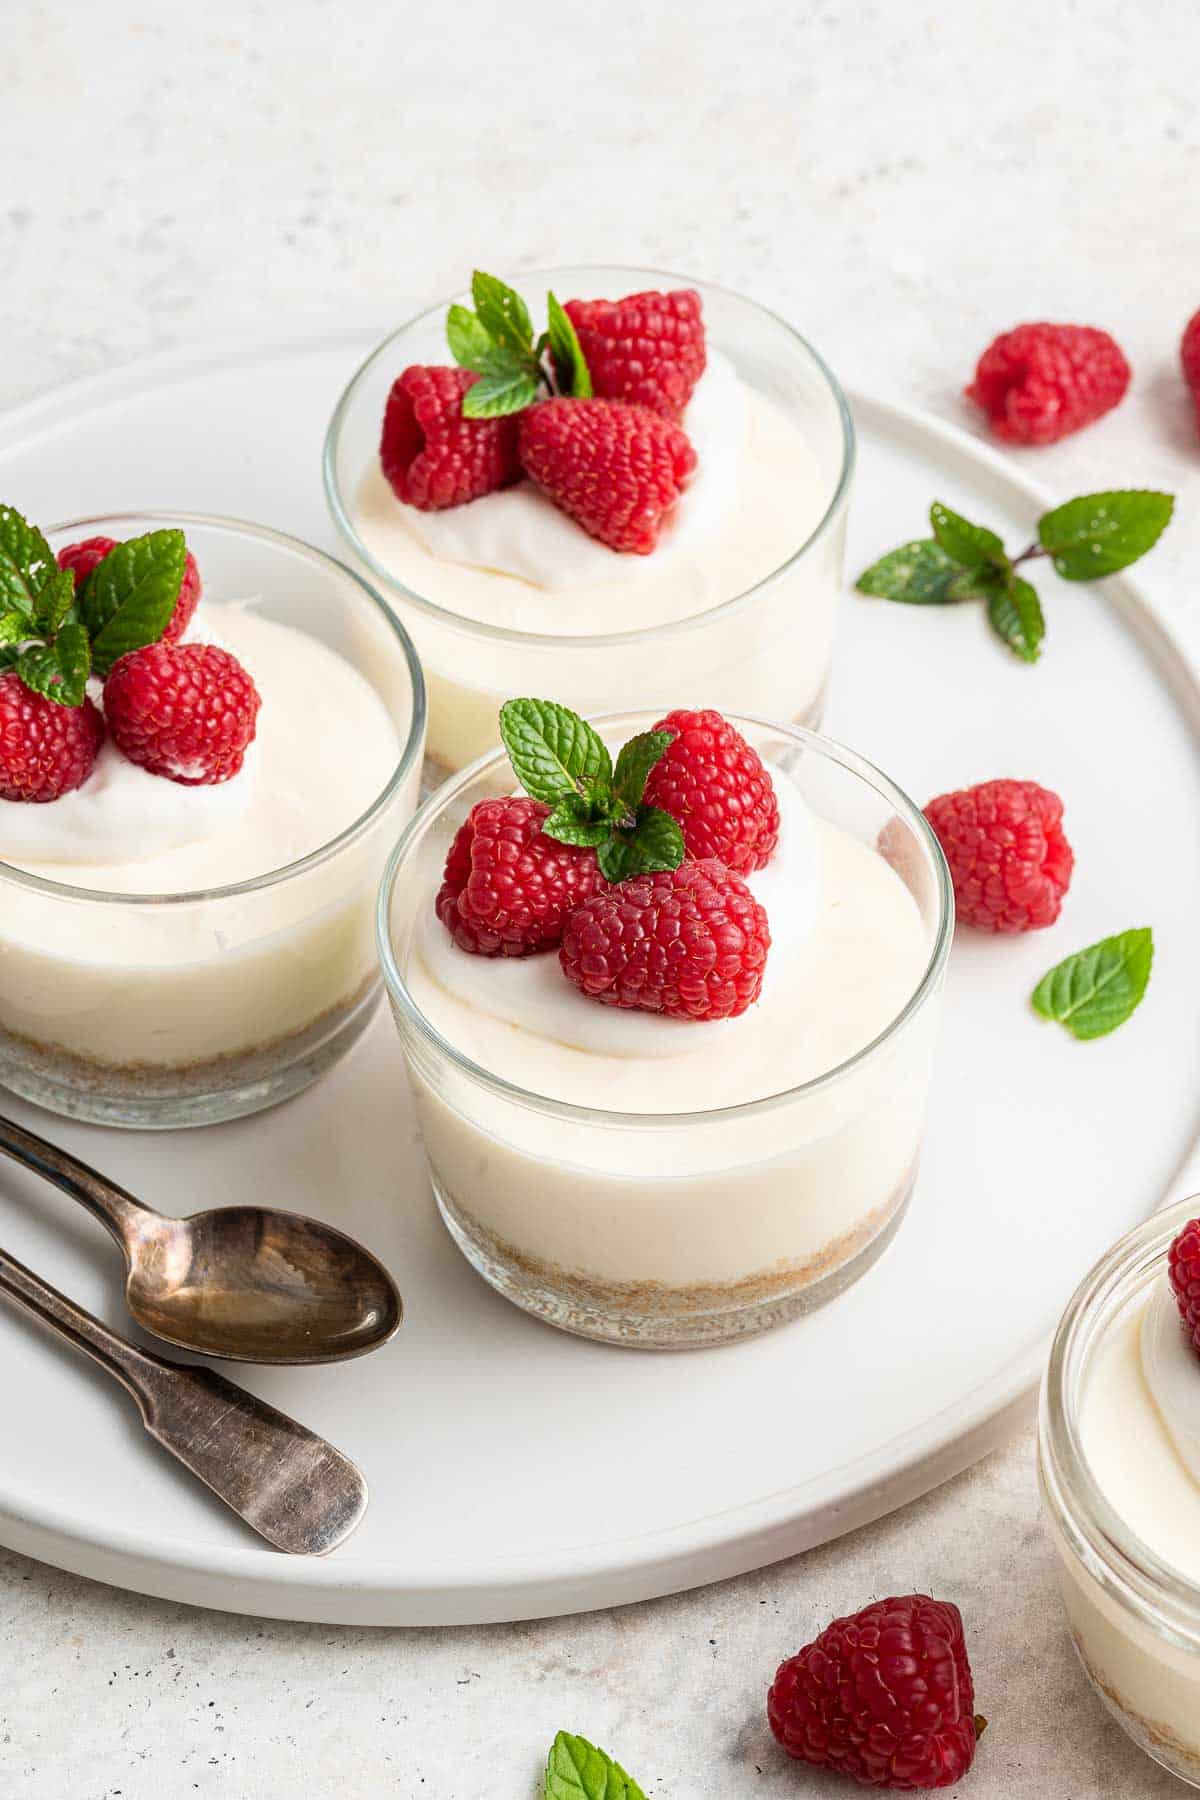 White plate with 3 no bake cheesecake cups on top, garnished with fresh raspberries.